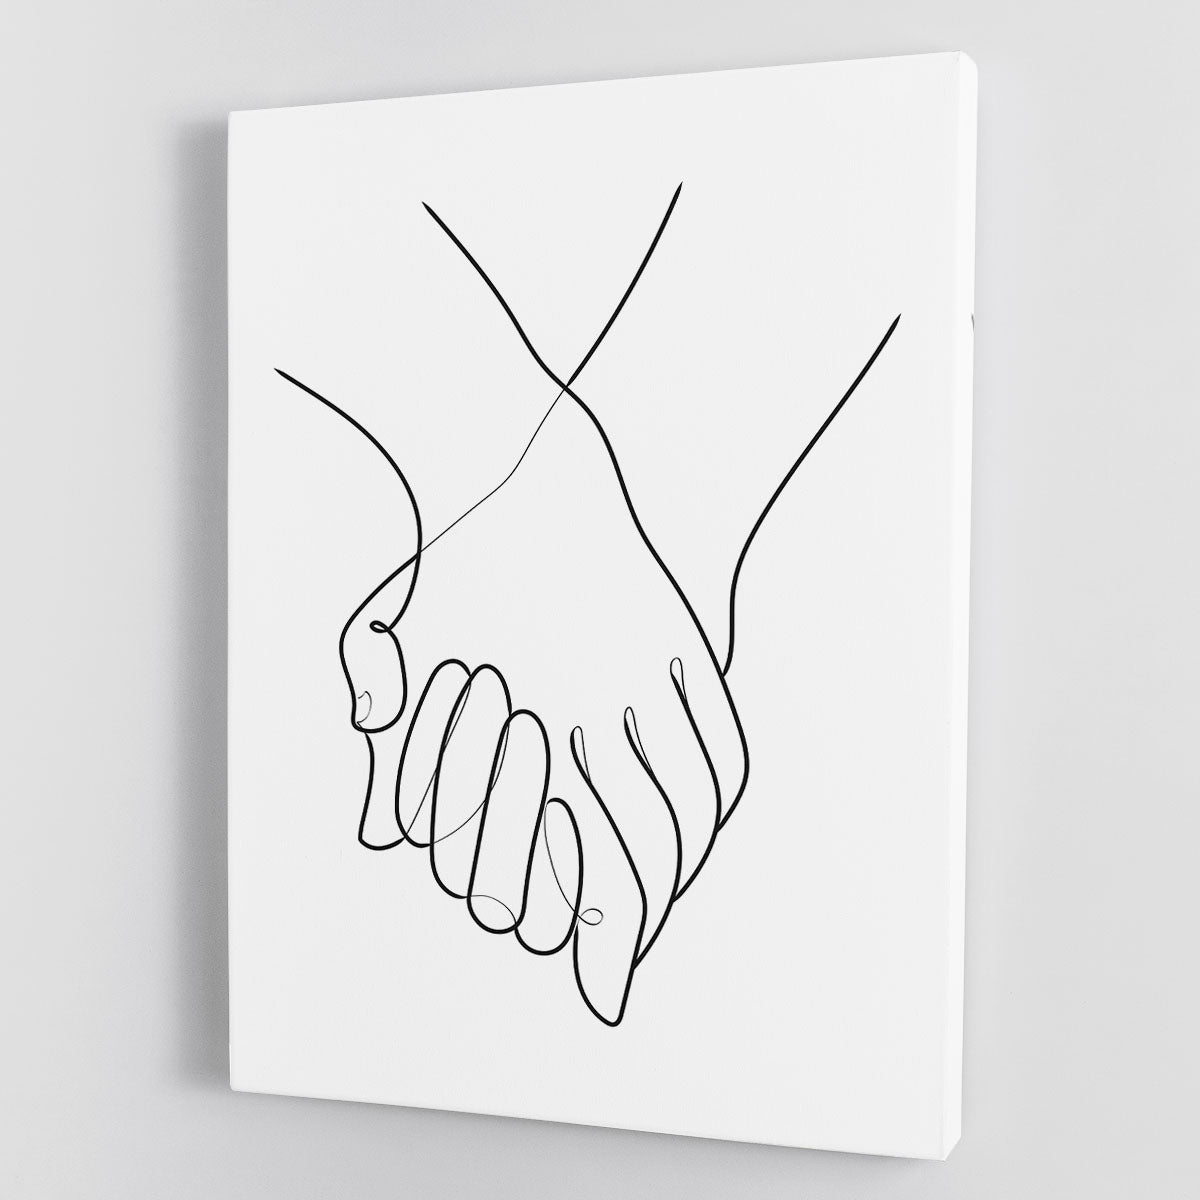 Holding Hands Lines Canvas Print or Poster - Canvas Art Rocks - 1